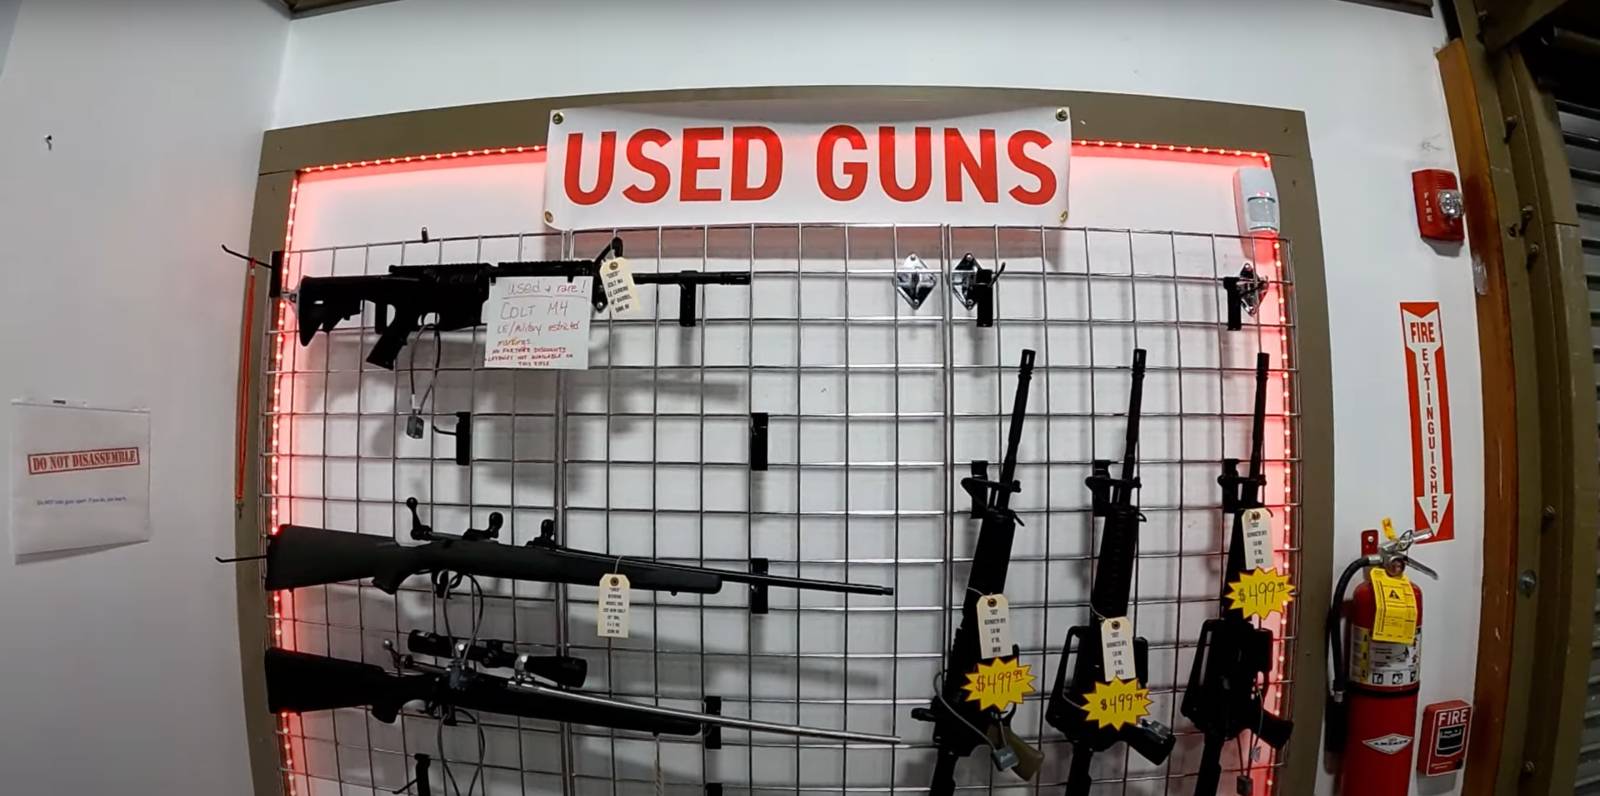 You asked for it! More used guns